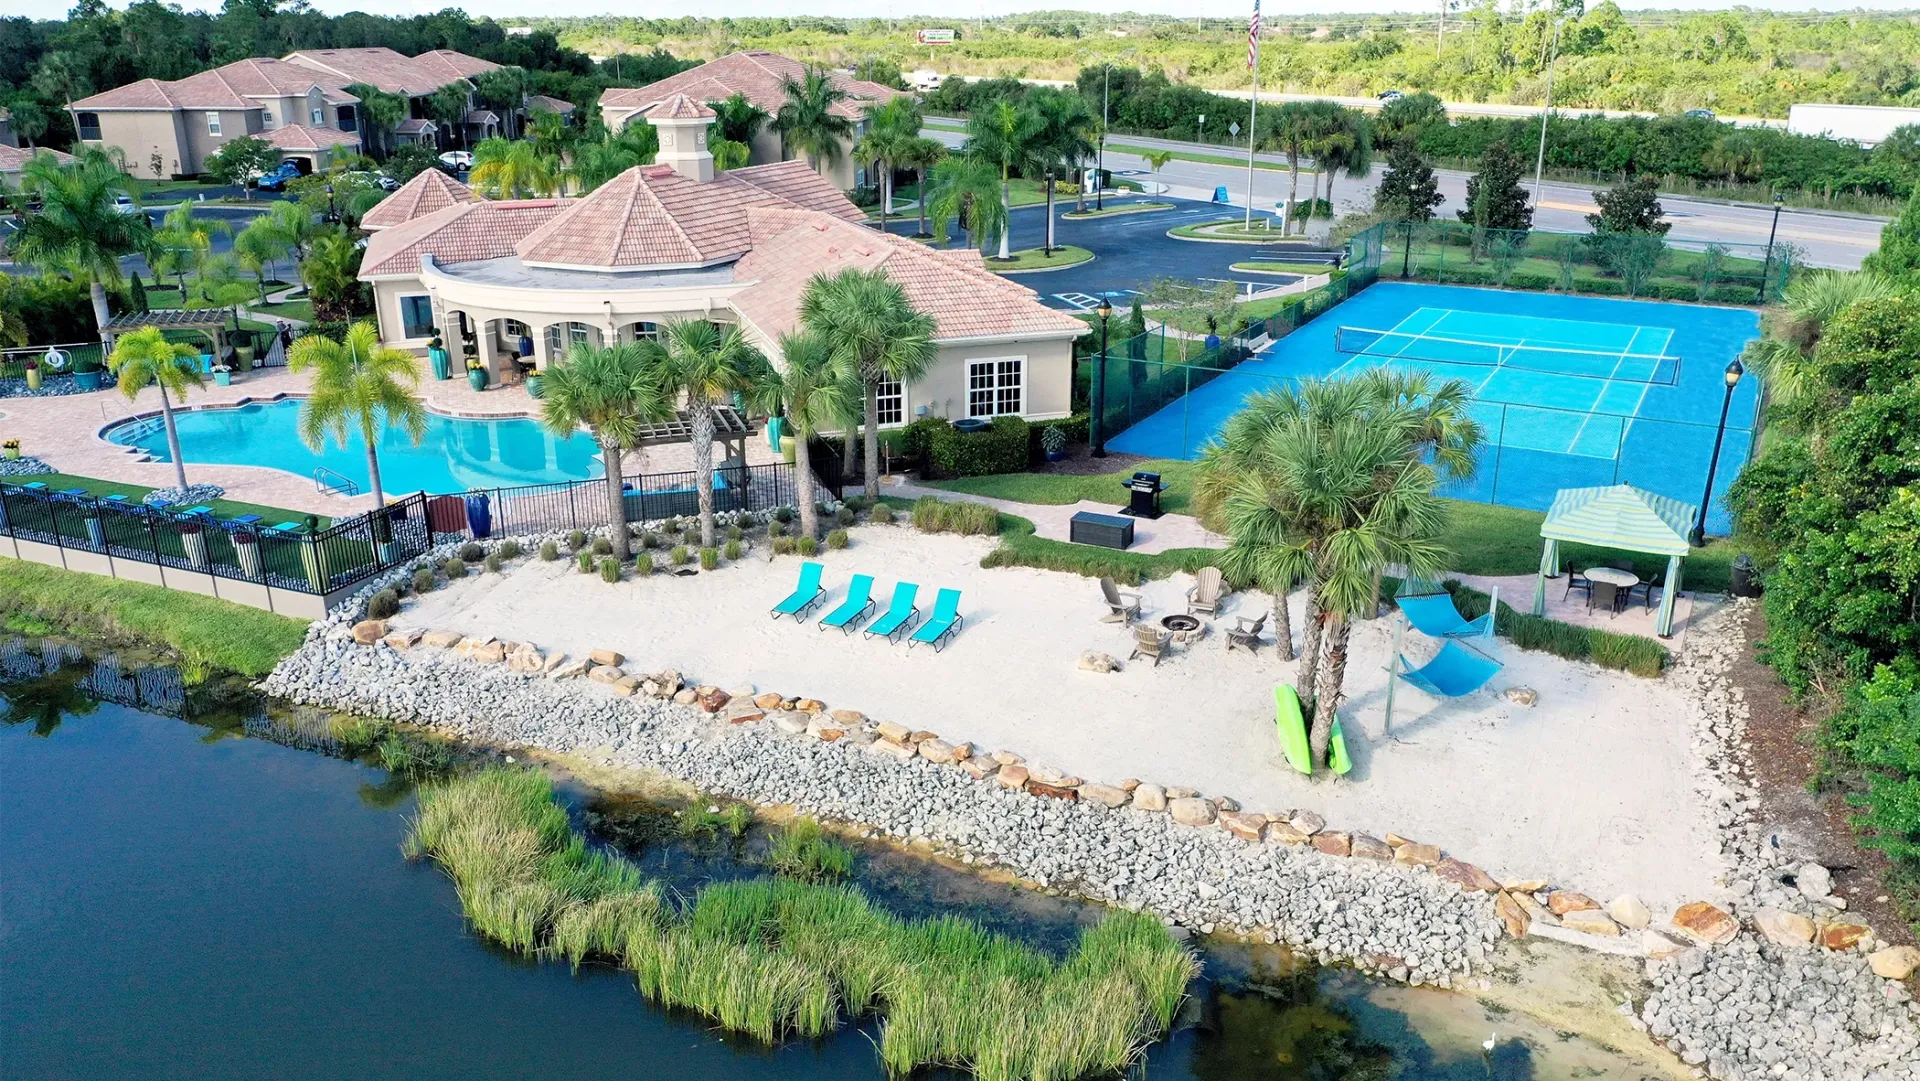 An aerial view of the clubhouse, beach, tennis court, and lake